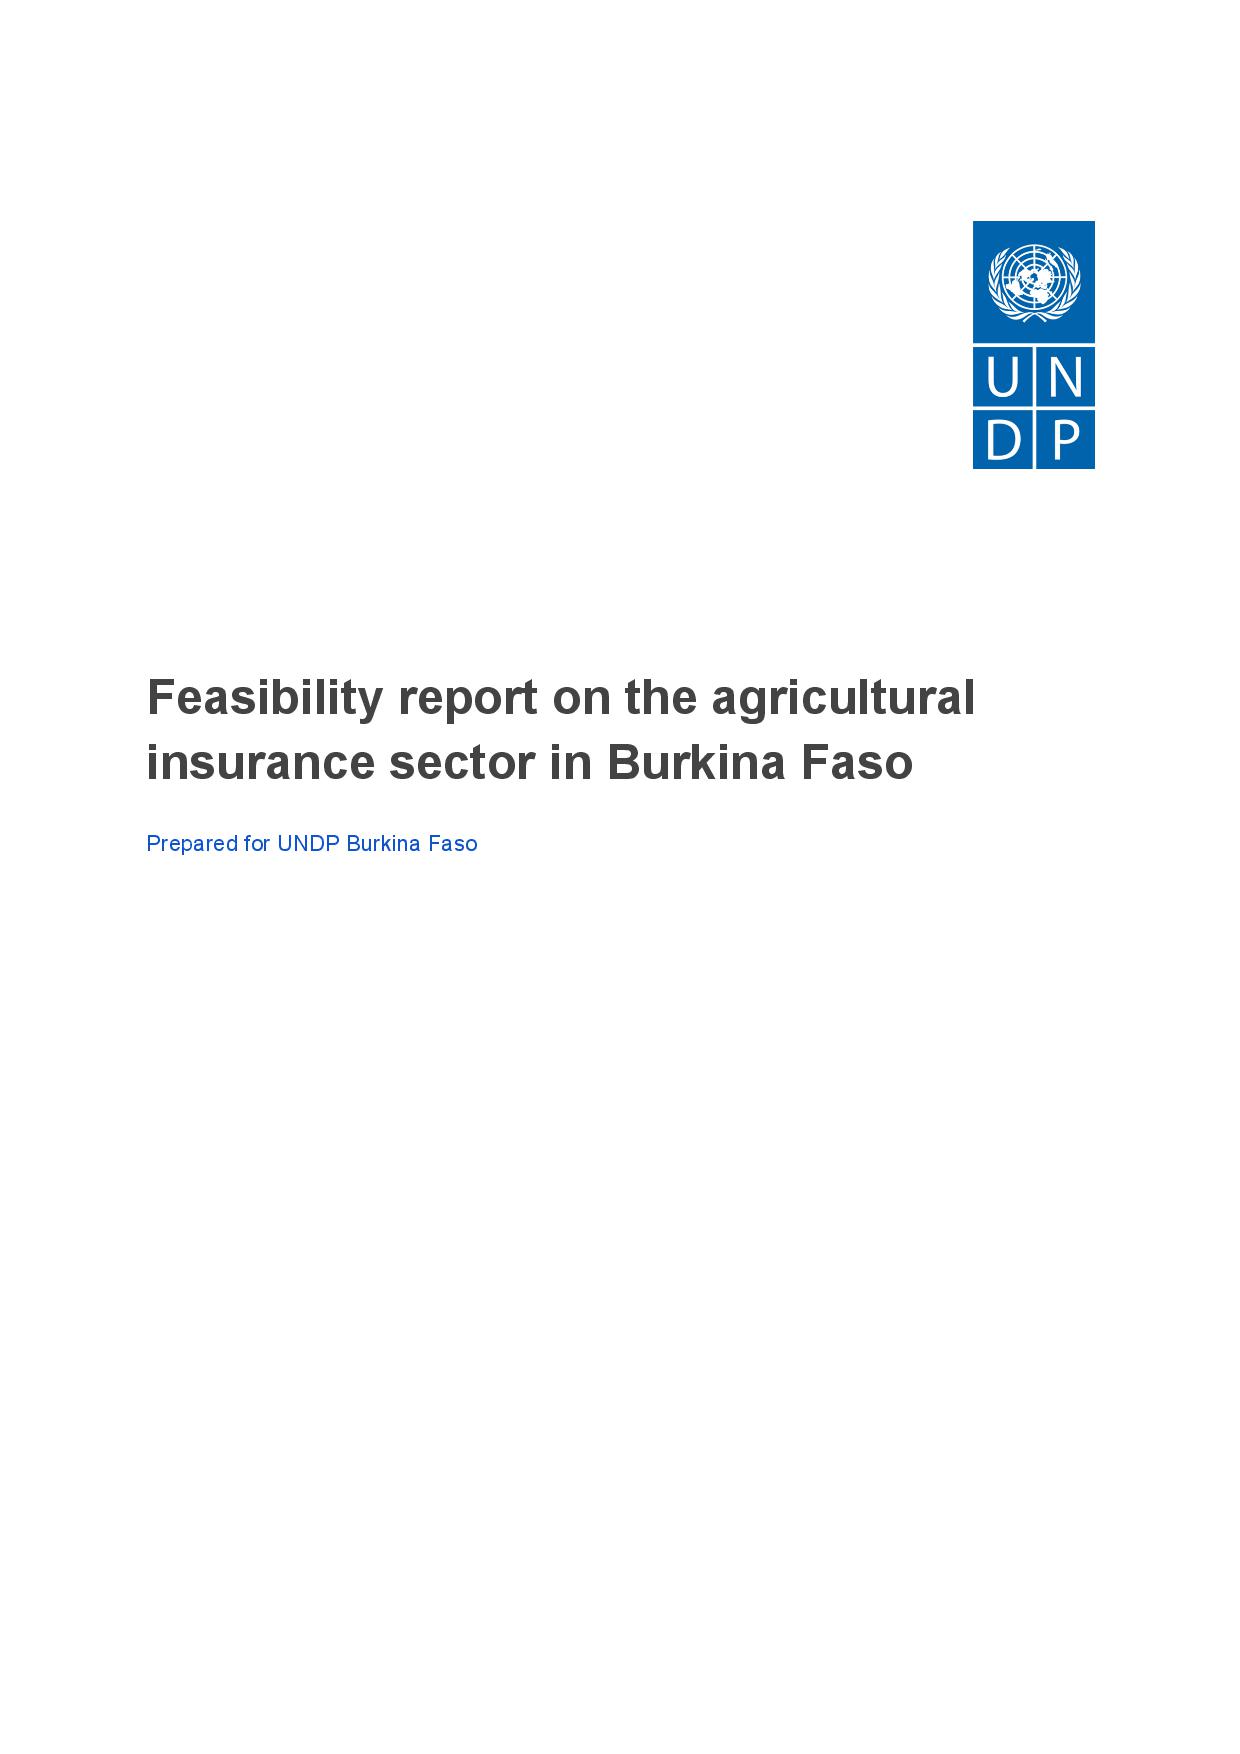 Cover - Feasibility report on the agricultural insurance sector in Burkina Faso 